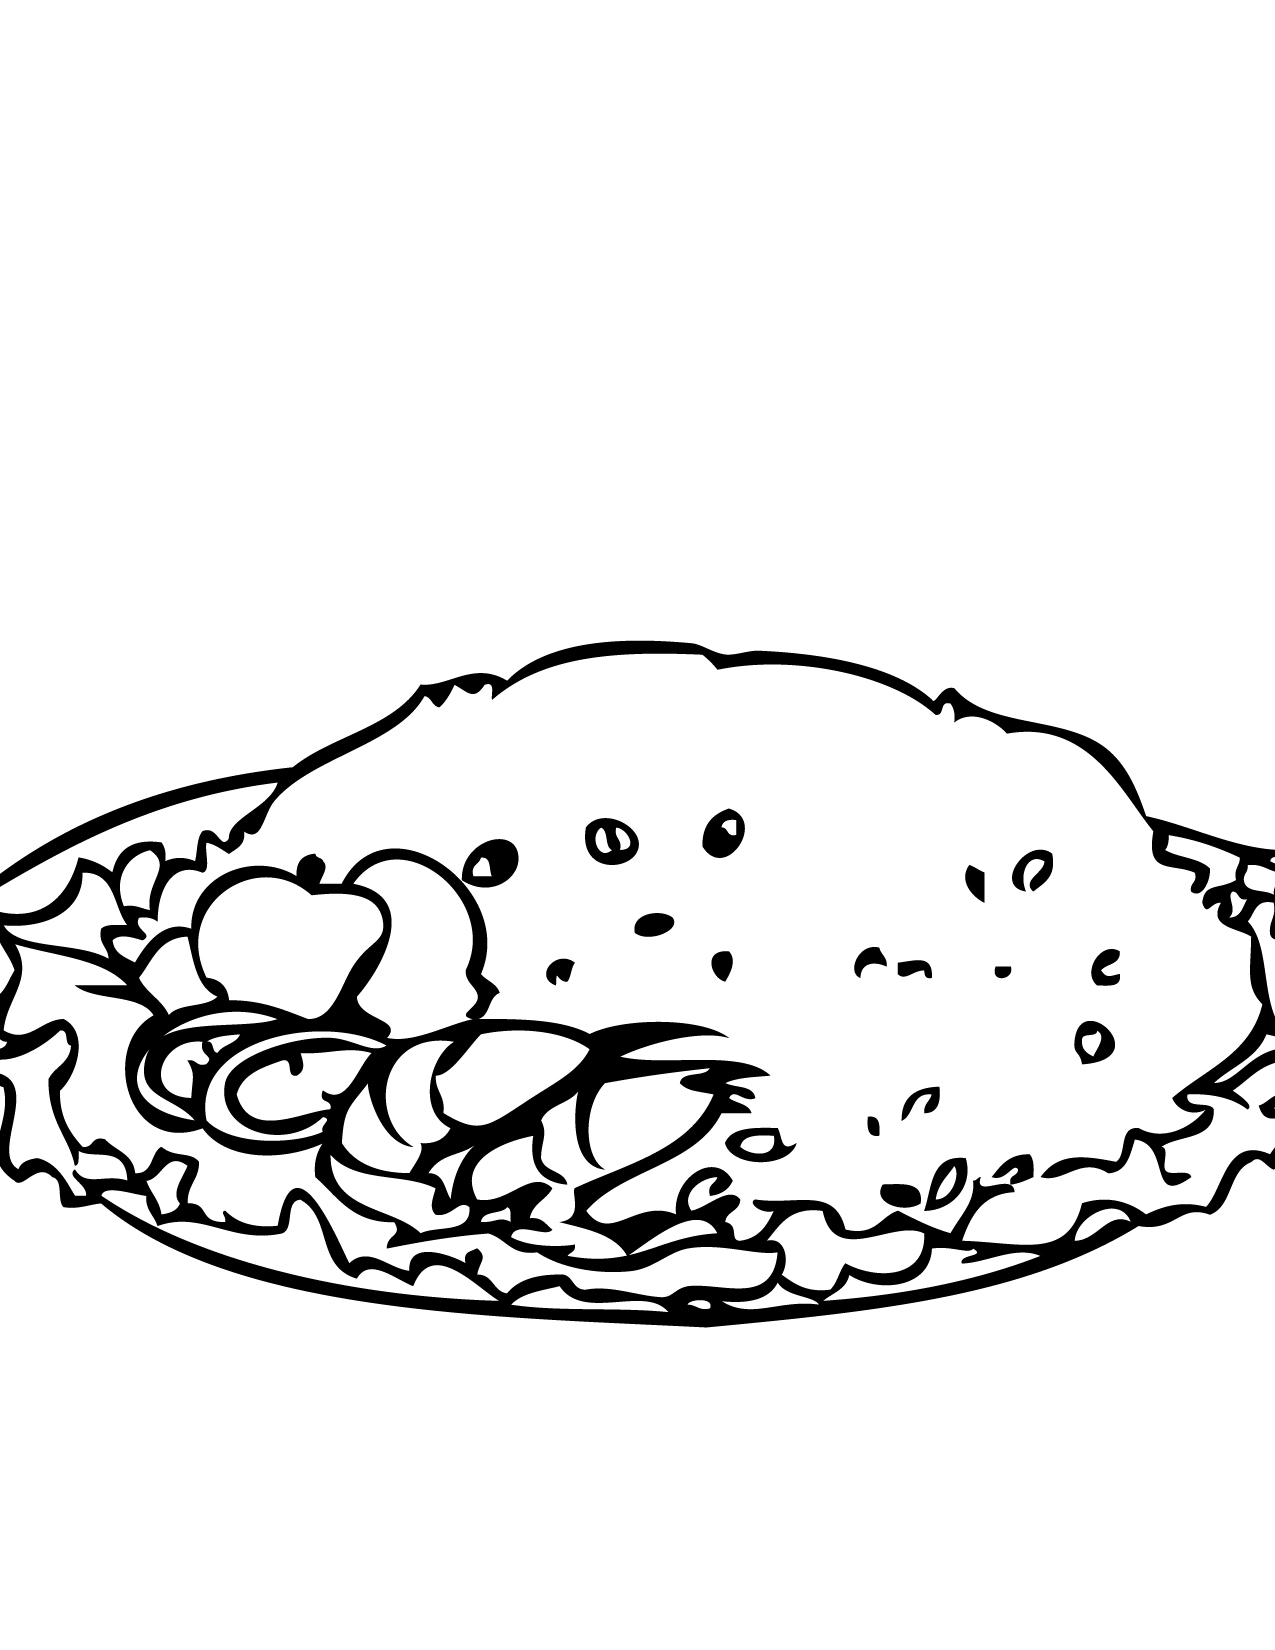 Rice clipart coloring page, Picture #3128626 rice clipart coloring page